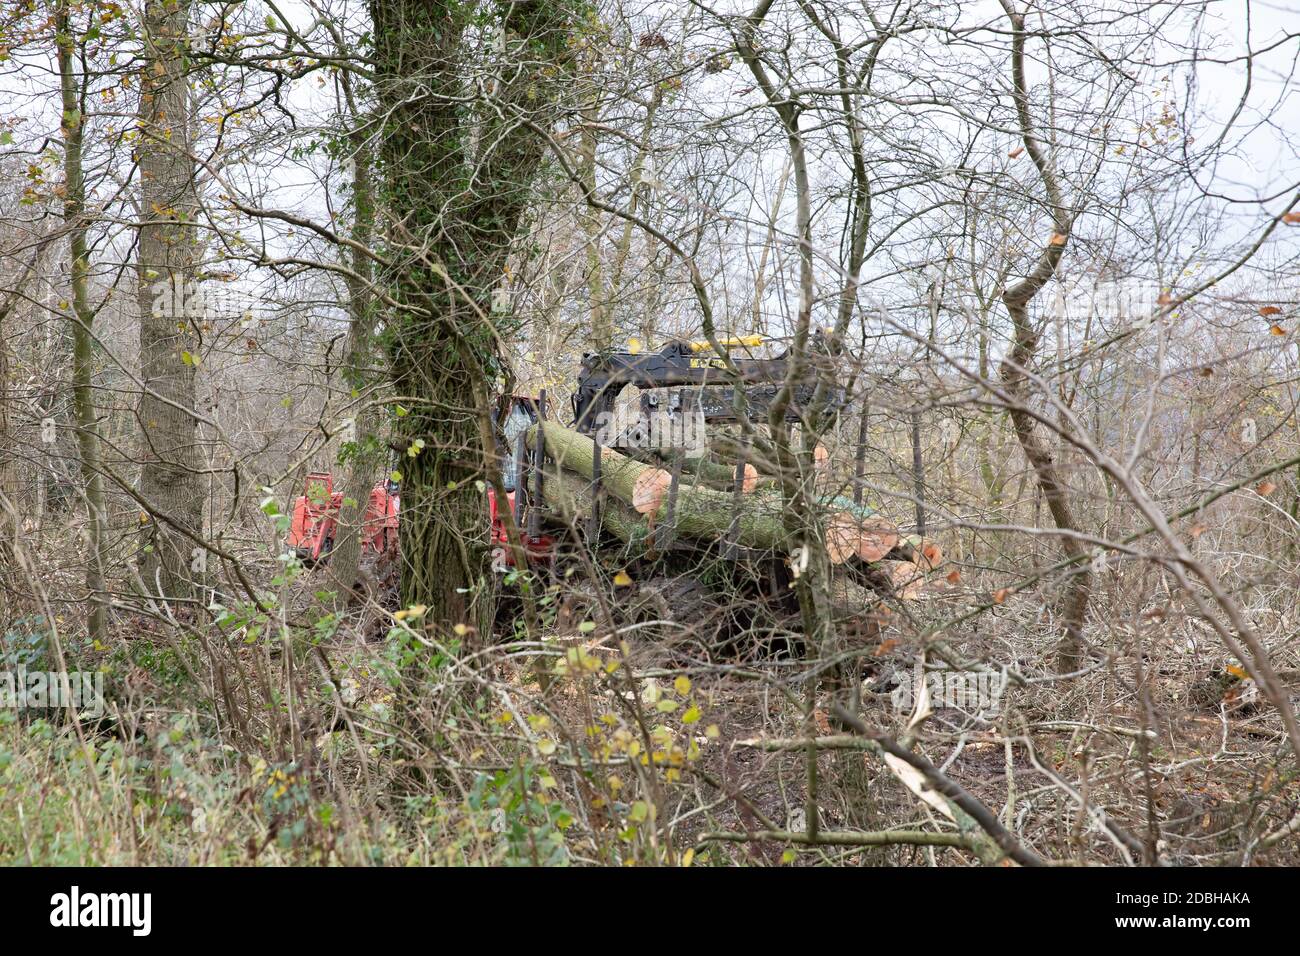 Titsey,Surrey,UK,17th November 2020,Deforestation takes place on White Lane,Titsey in Surrey. Ash trees are being felled due to disease making them unsafe and unstable.  The trees will all be replaced with new saplings as the loss of trees and other vegetation can cause climate change, desertification, soil erosion, fewer crops, flooding, increased greenhouse gases in the atmosphere.Credit: Keith Larby/Alamy Live News Stock Photo